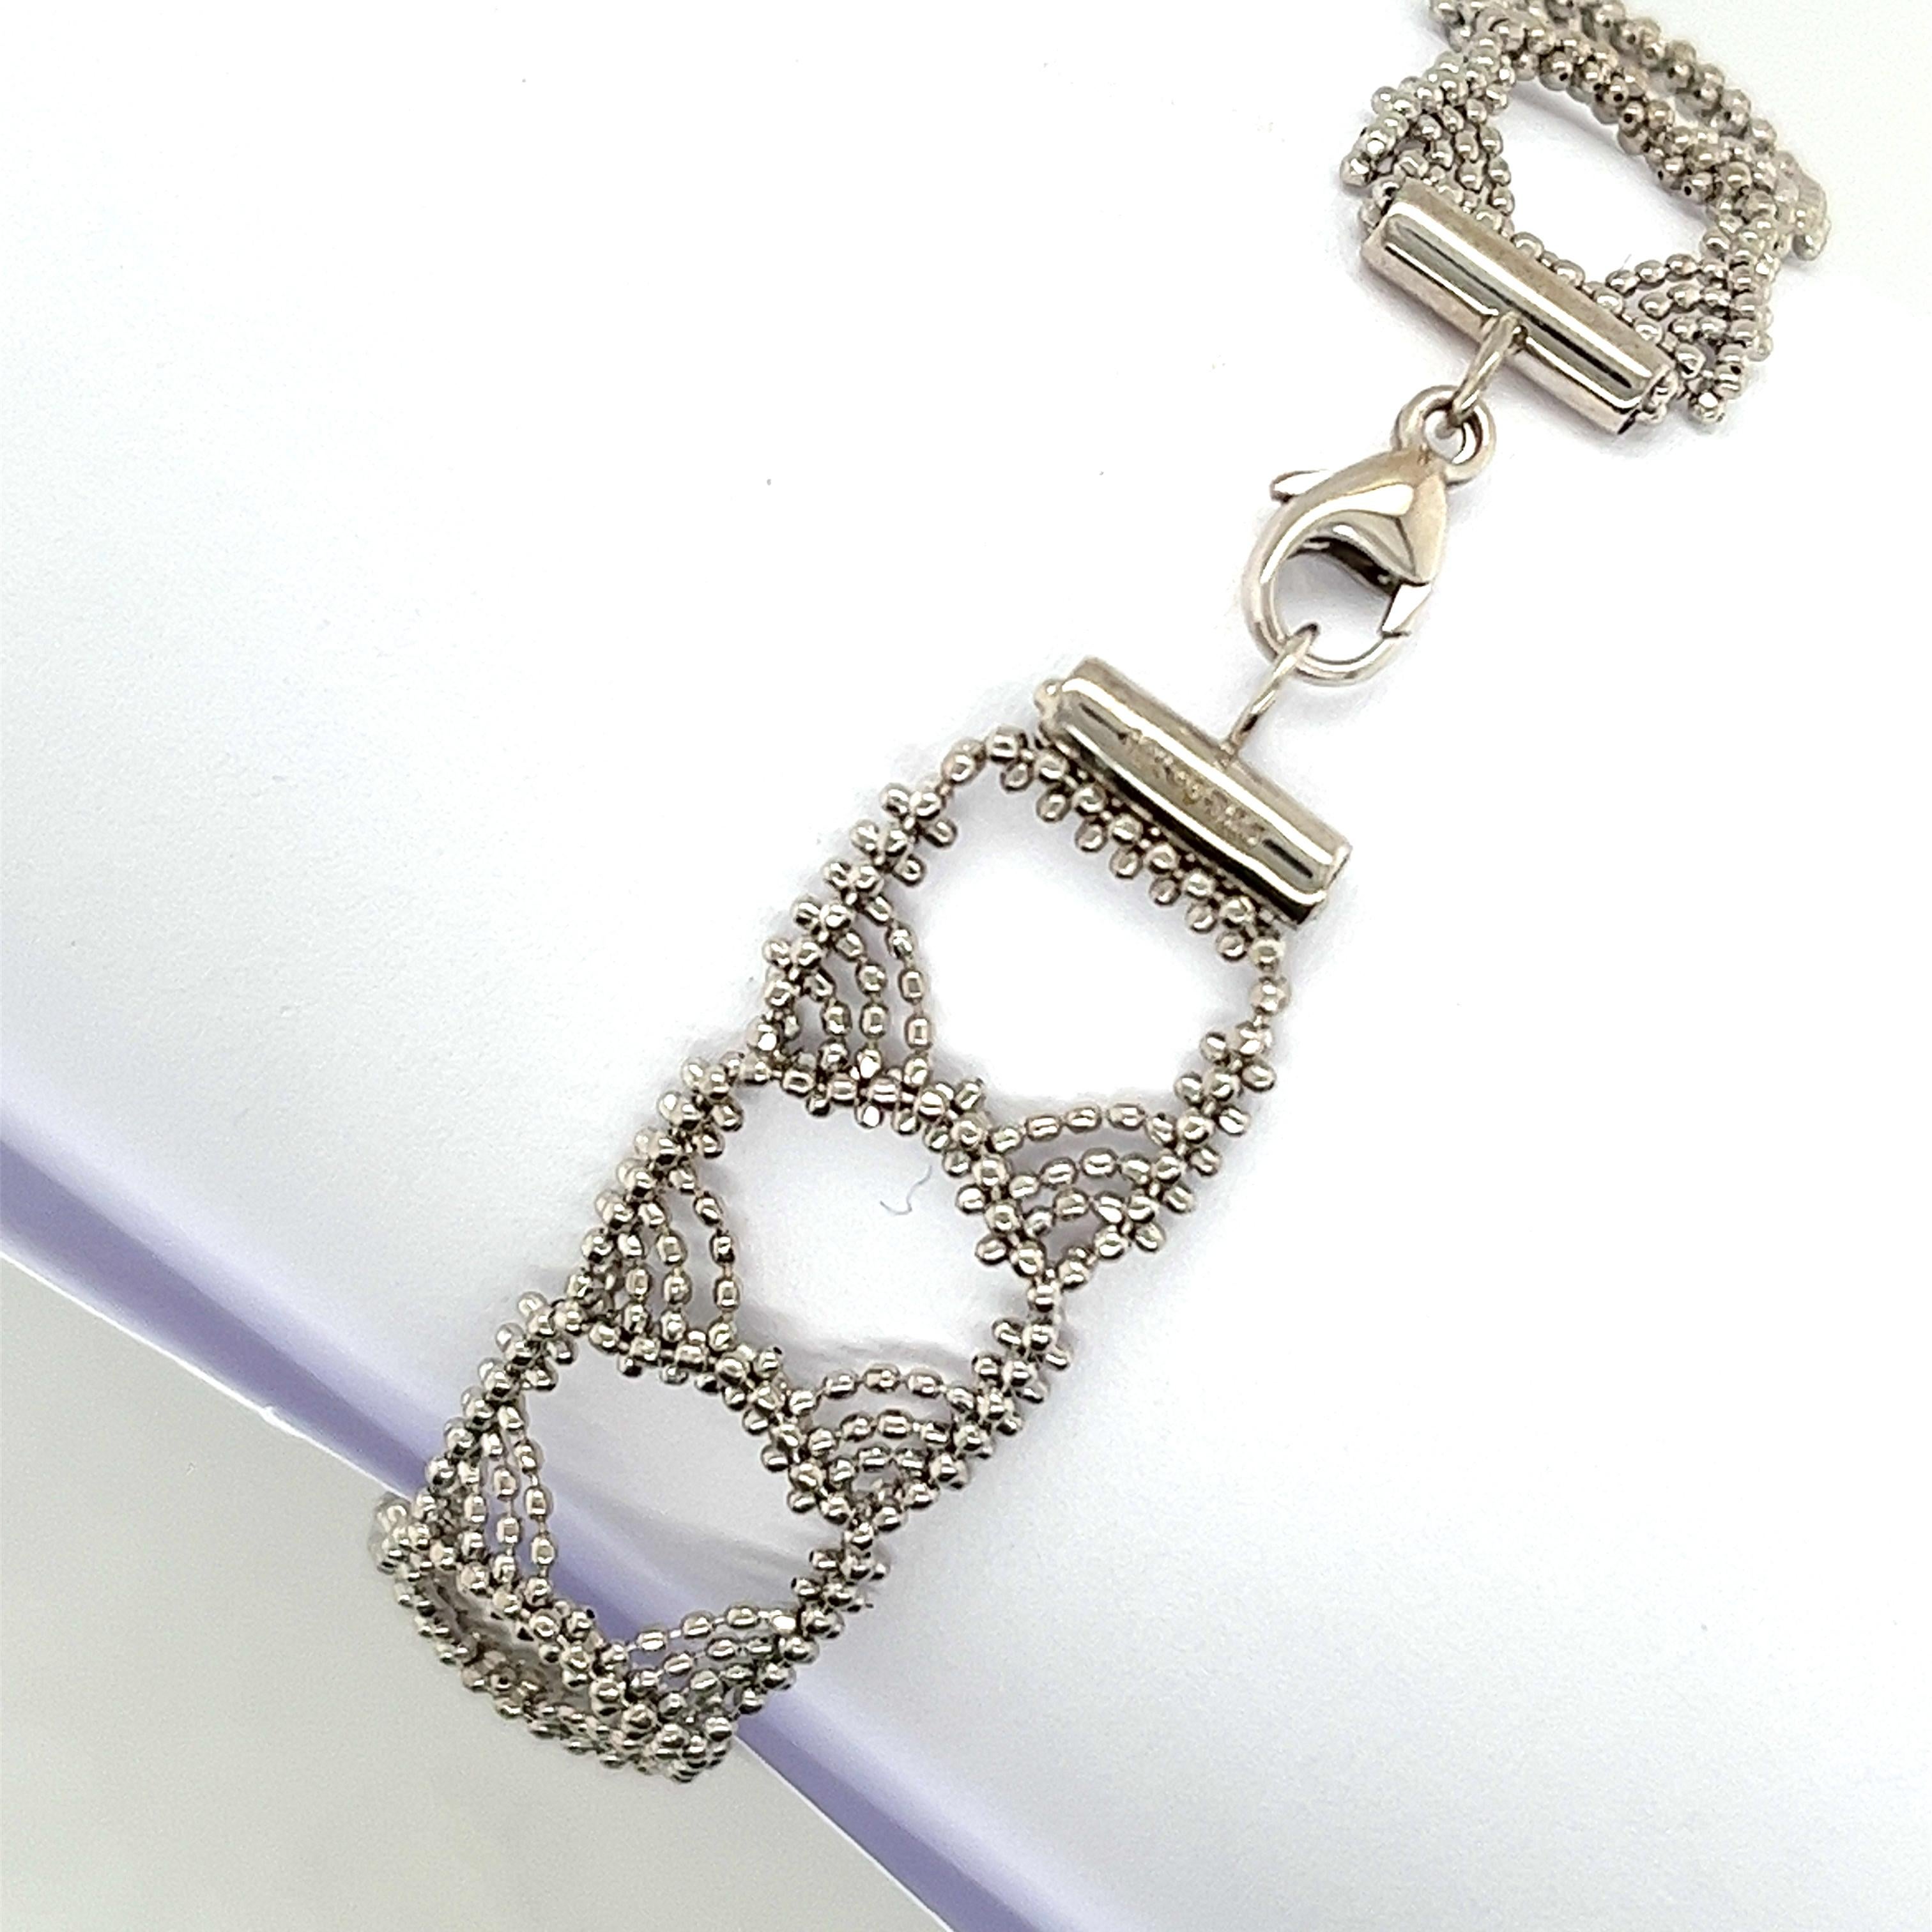 Tiffany & Co Beaded Flexible Bracelet 18ct White Gold In Excellent Condition For Sale In London, GB